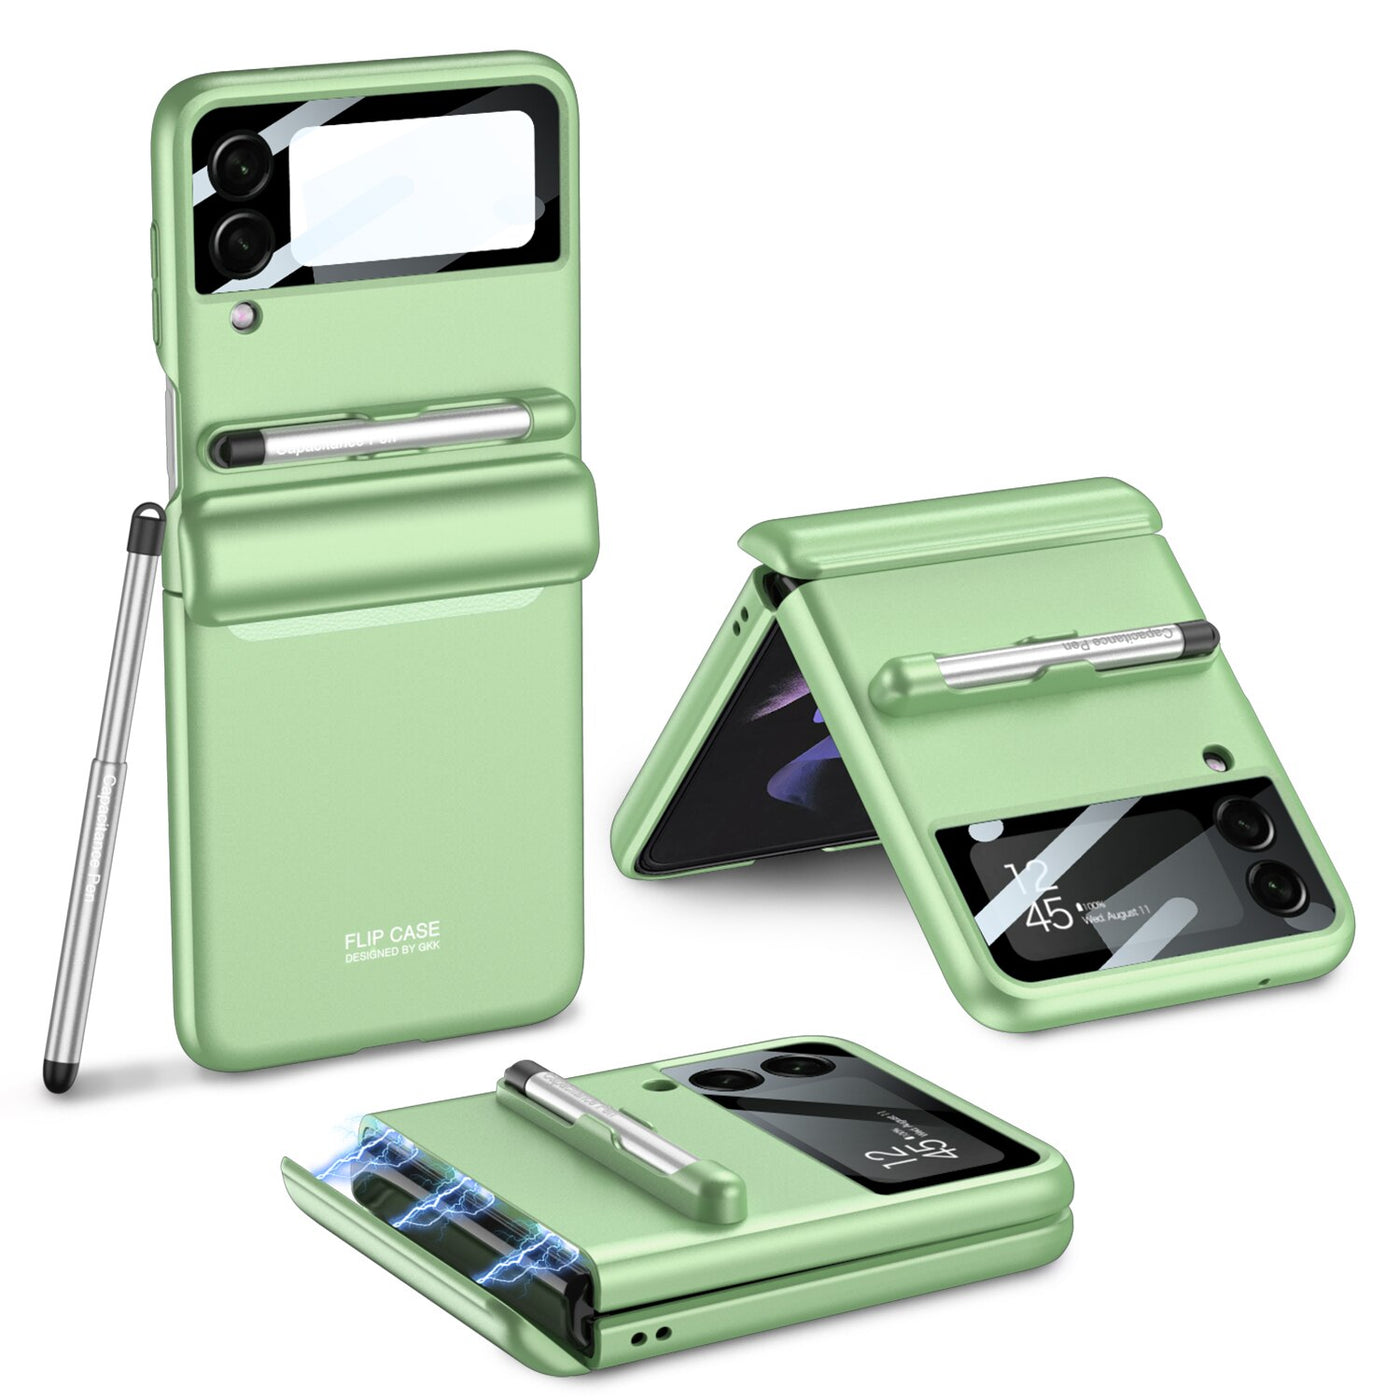 Magnetic Hinge Case with Pen For Samsung Galaxy Z Flip 4